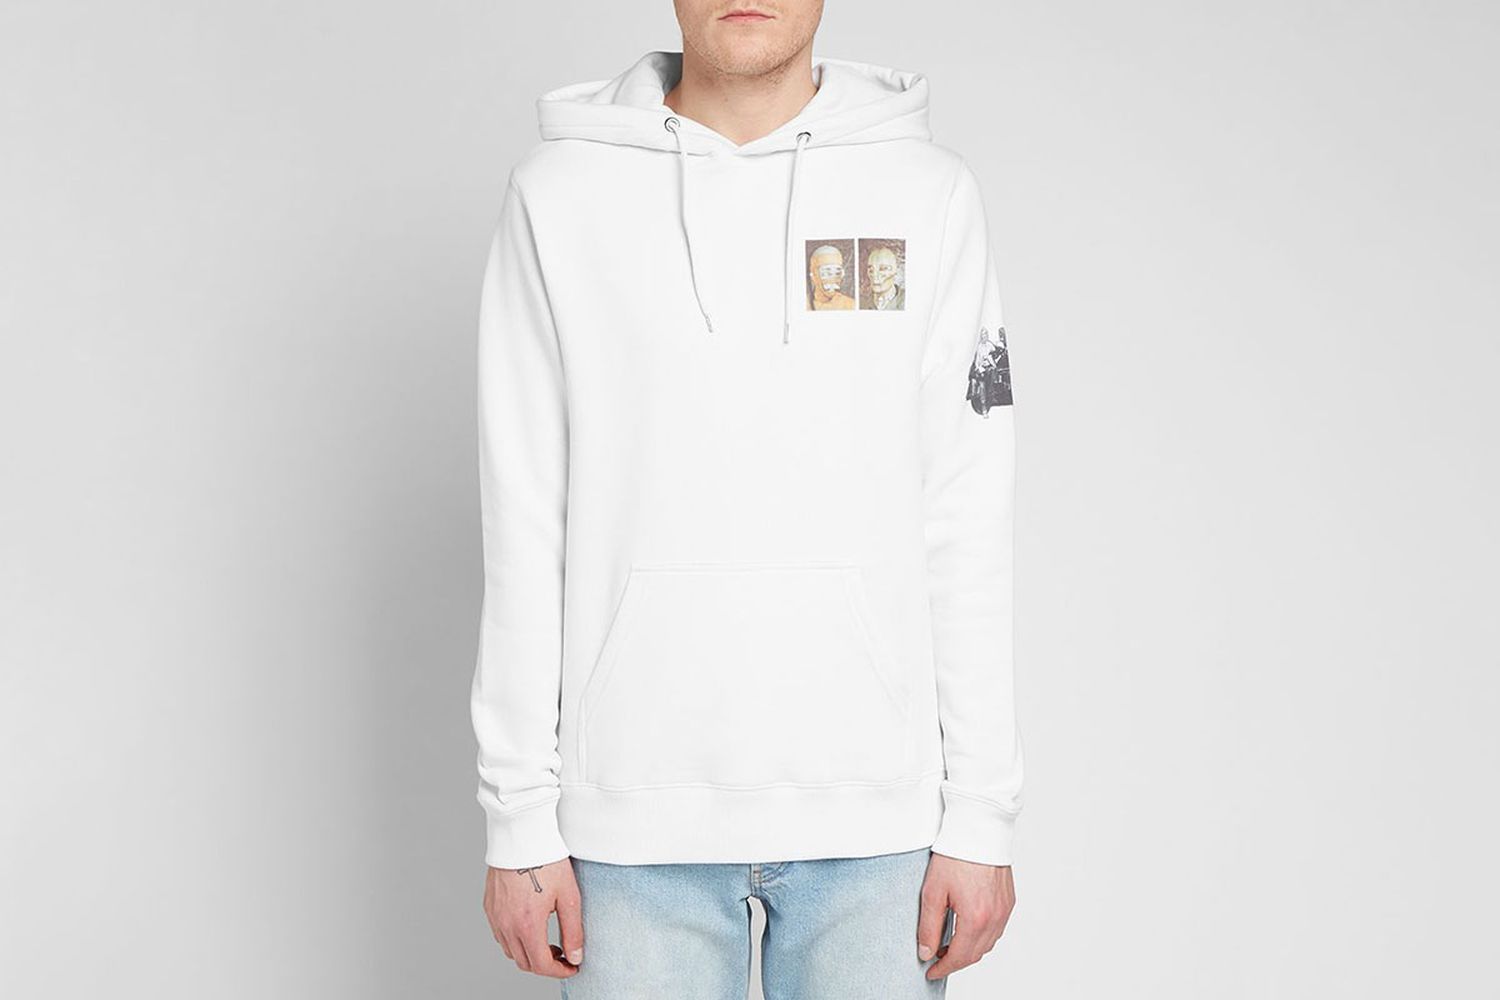 Wise-Up Popover Hoody